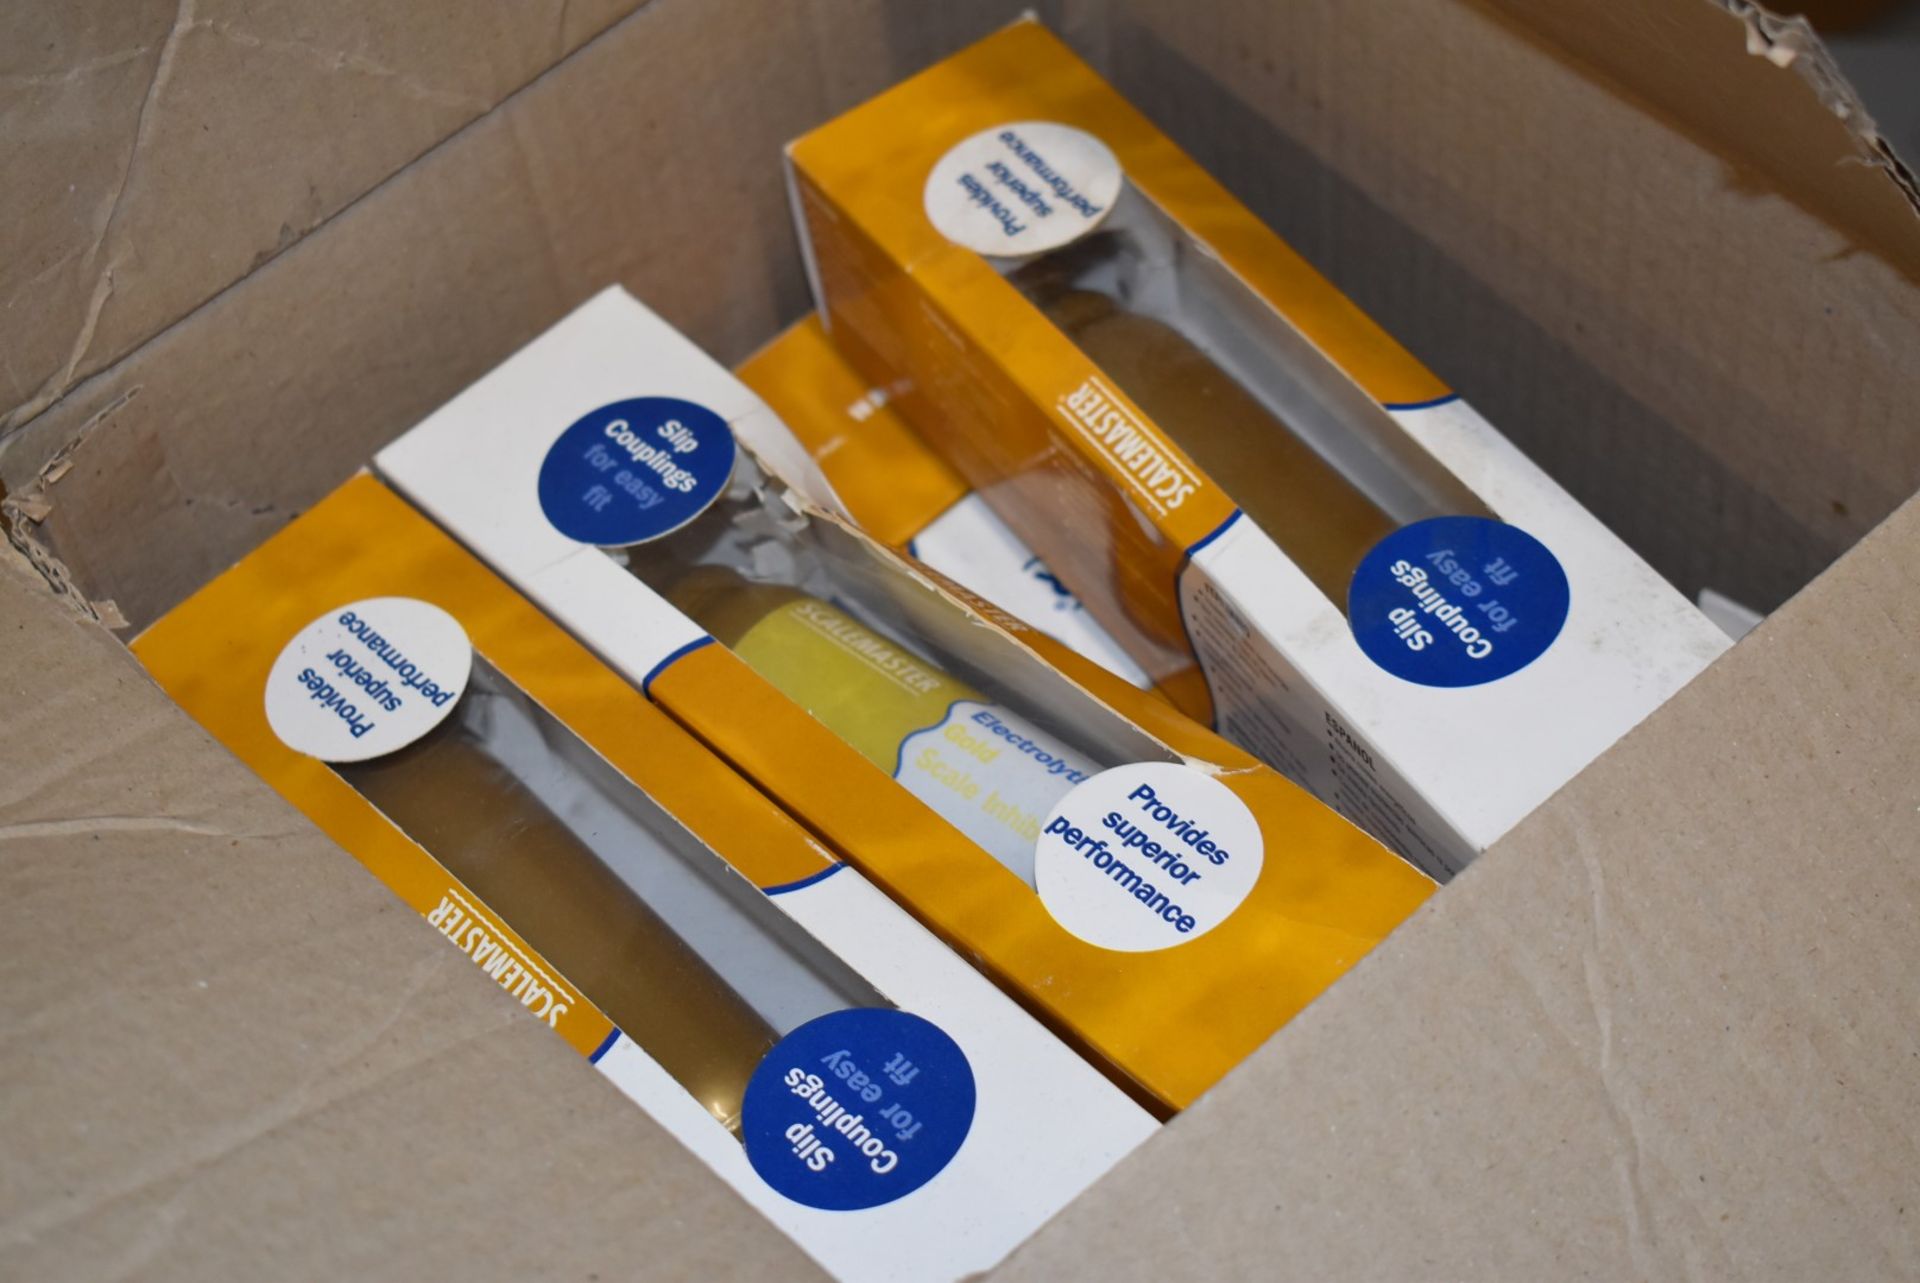 7 x Scalemaster Electrolytic Gold Electrolytic 15mm Limescale Remover - New Boxed Stock - RRP £330 - Image 2 of 5